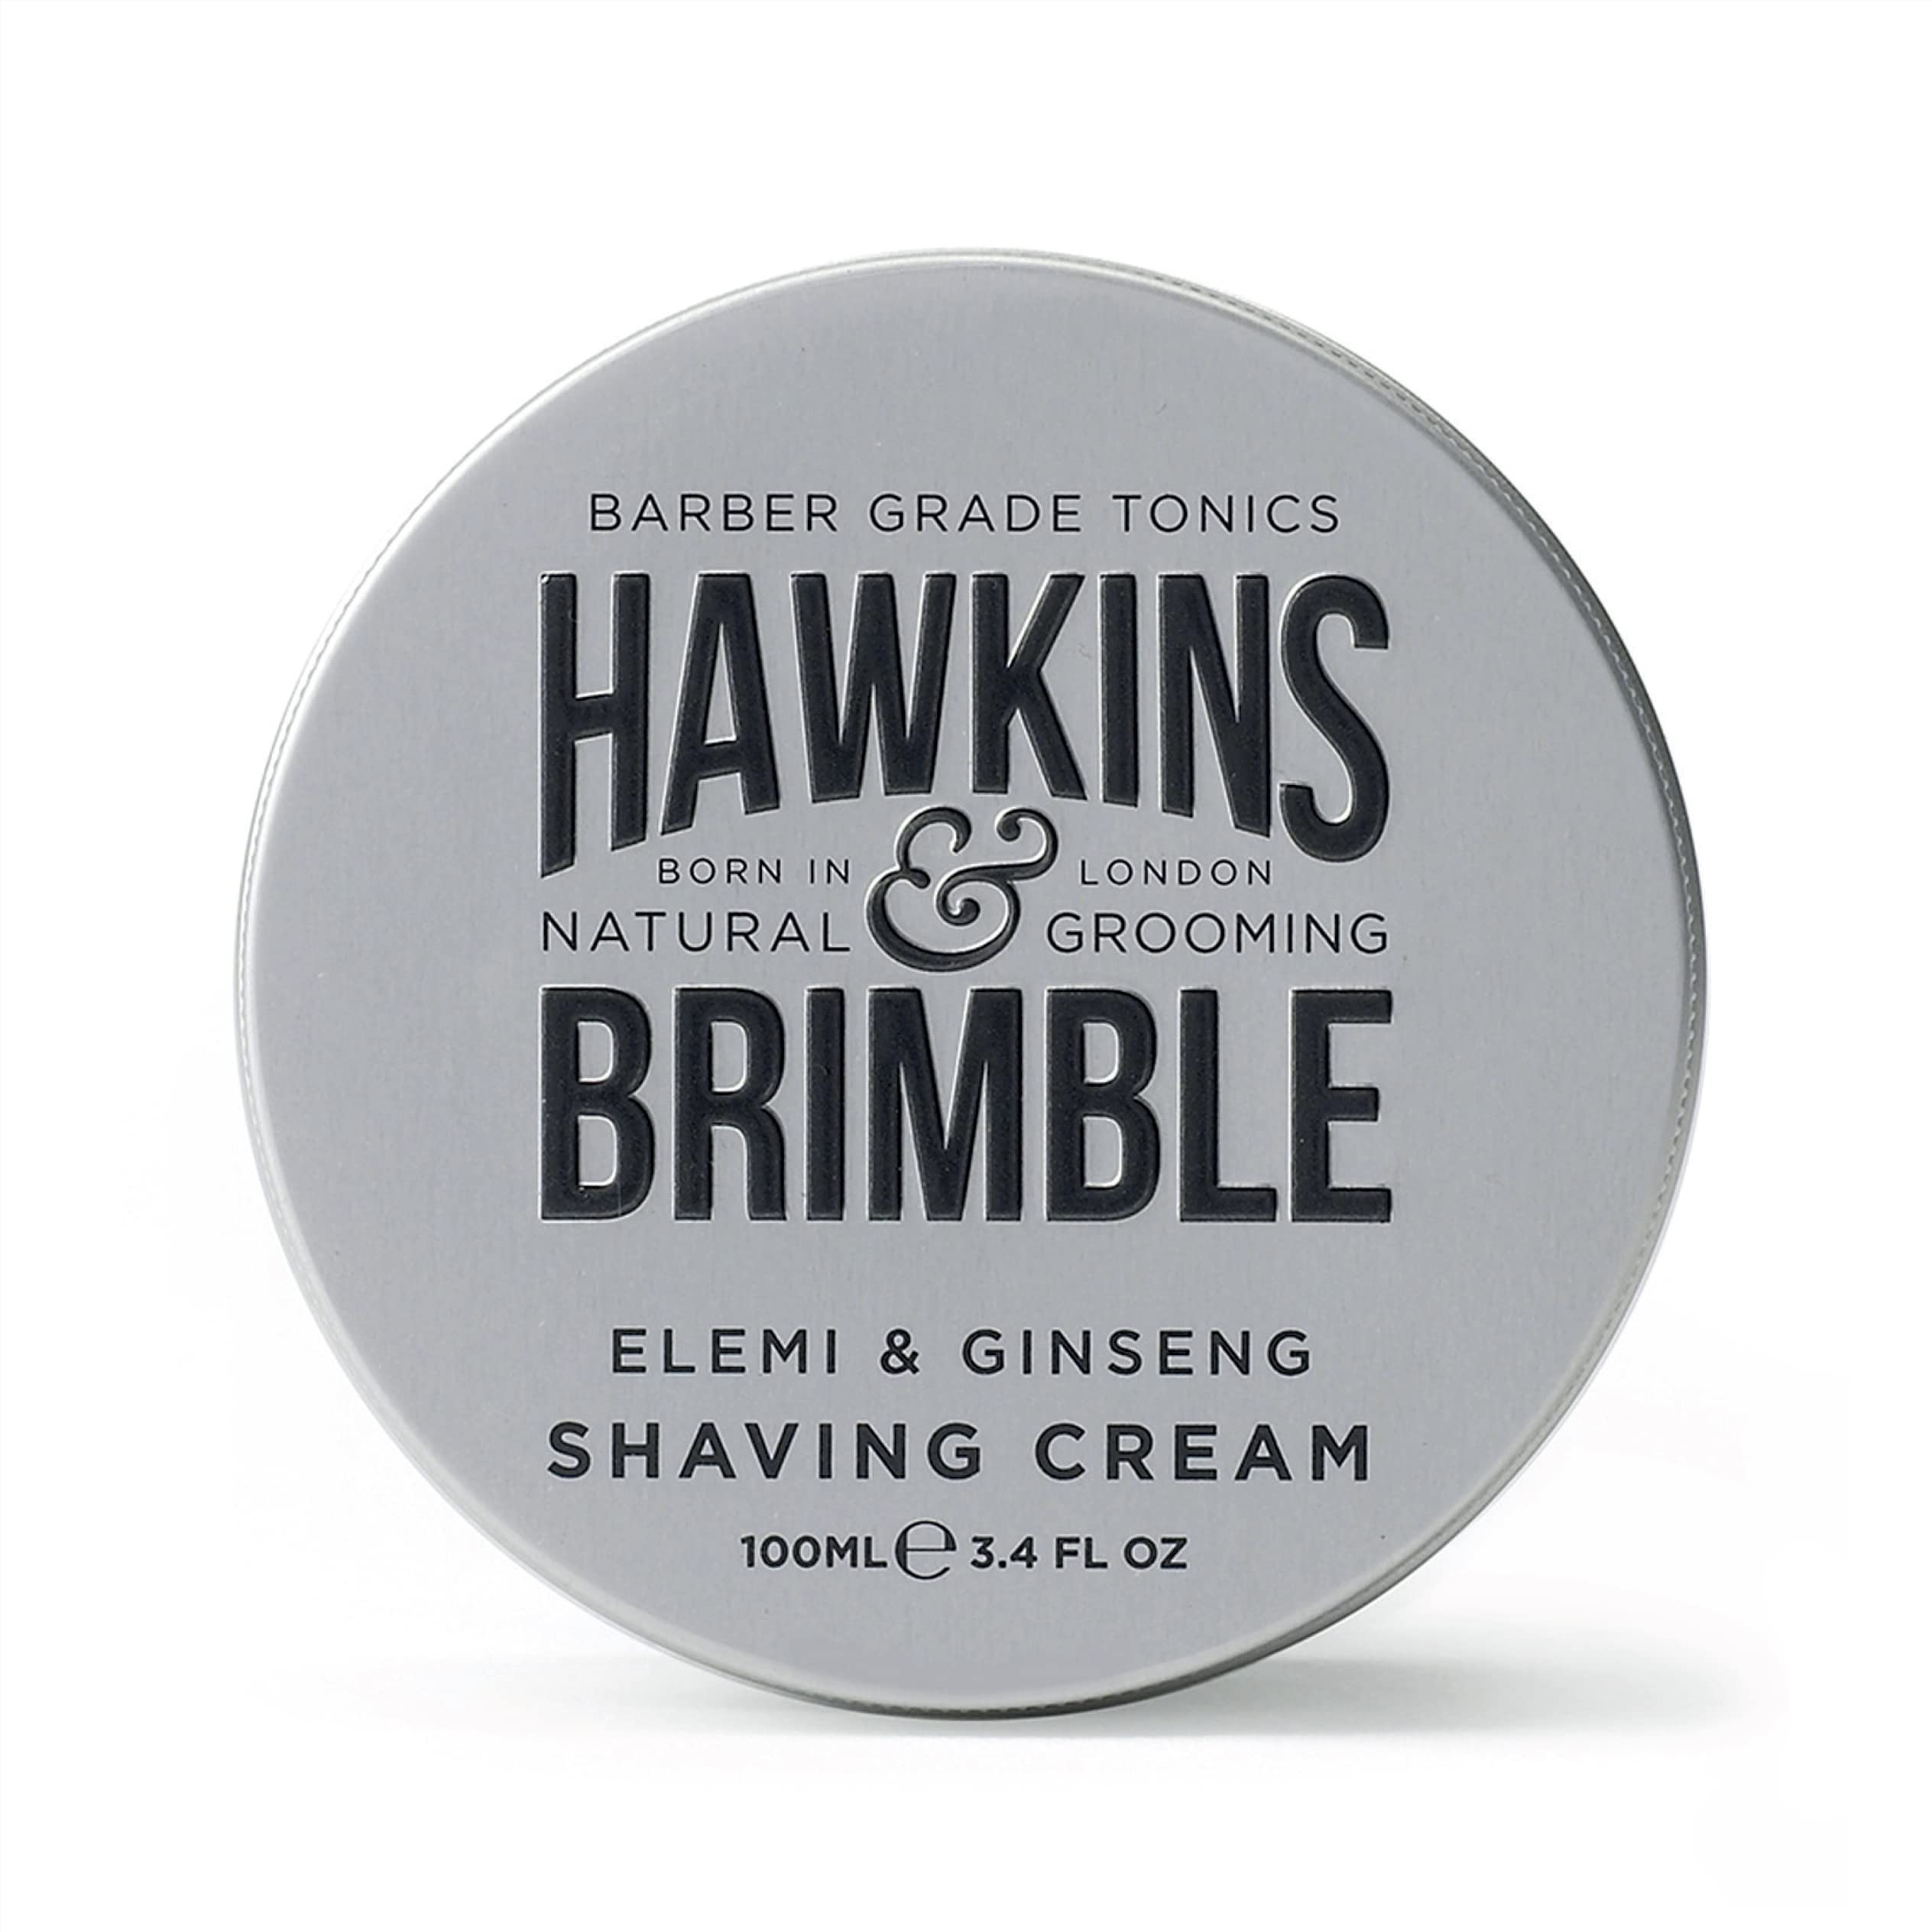 Hawkins & Brimble Traditional Shave Cream, Nourishing Mens Shaving Cream, Signature Shaving Cream Fragrances, Shaving Cream for Men Without Animal Testing